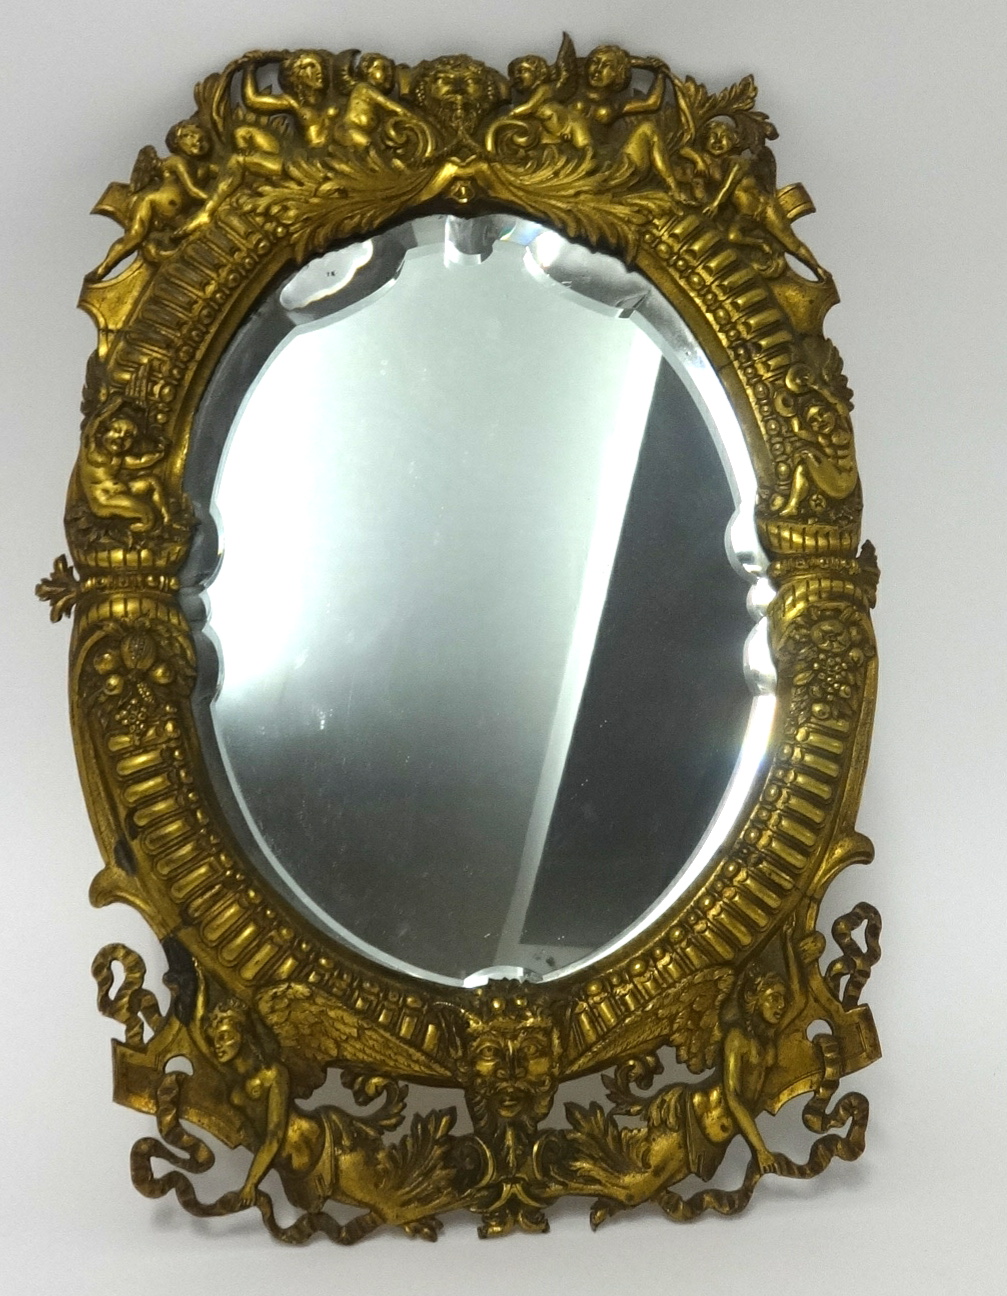 A gilt metal wall mirror, the ornate frame decorated with figures, cherubs, masks and ribbons,